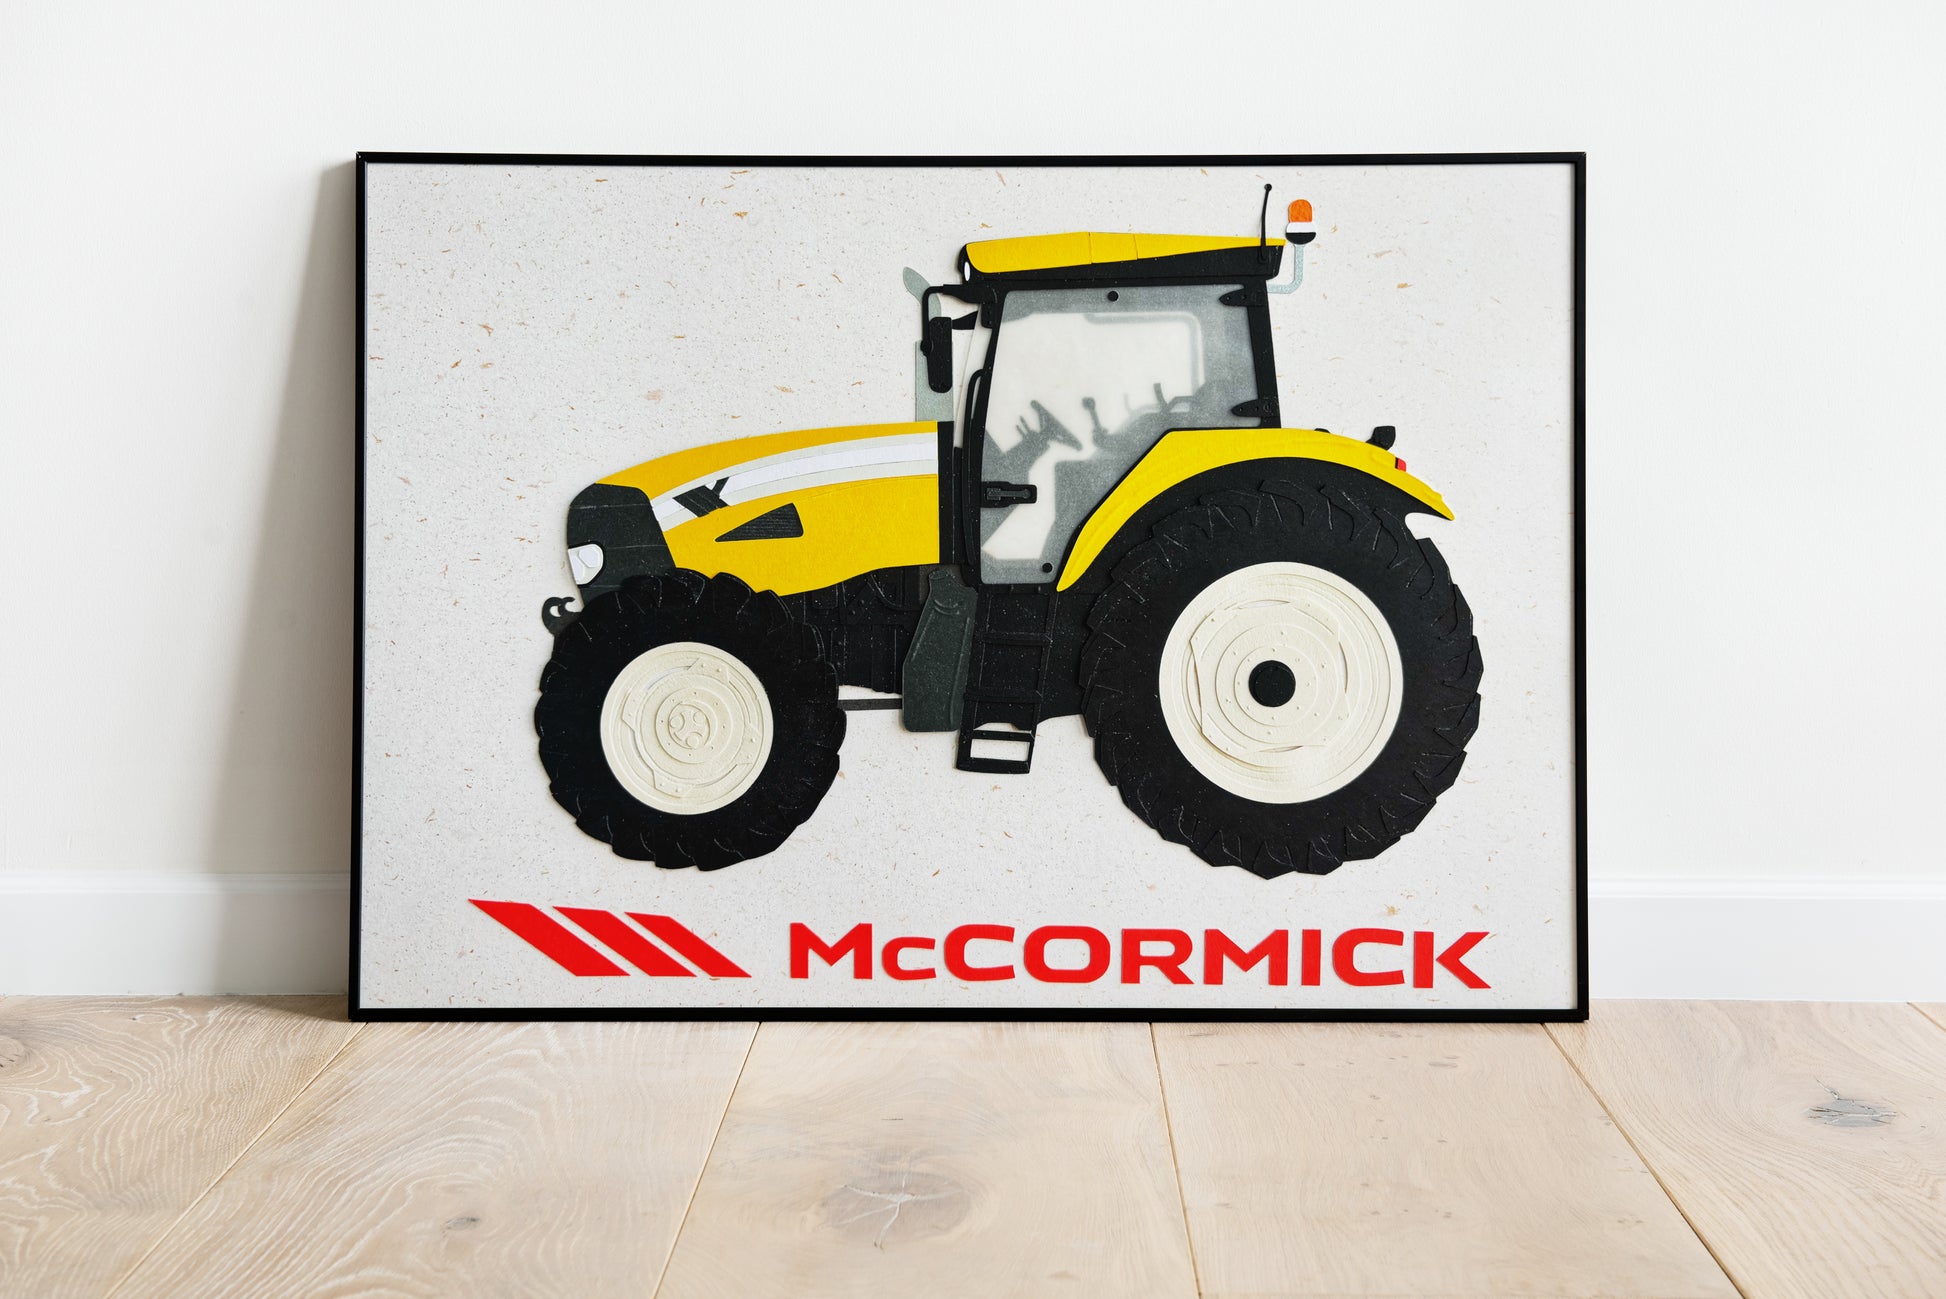 Example of a poster with a tractor in a frame